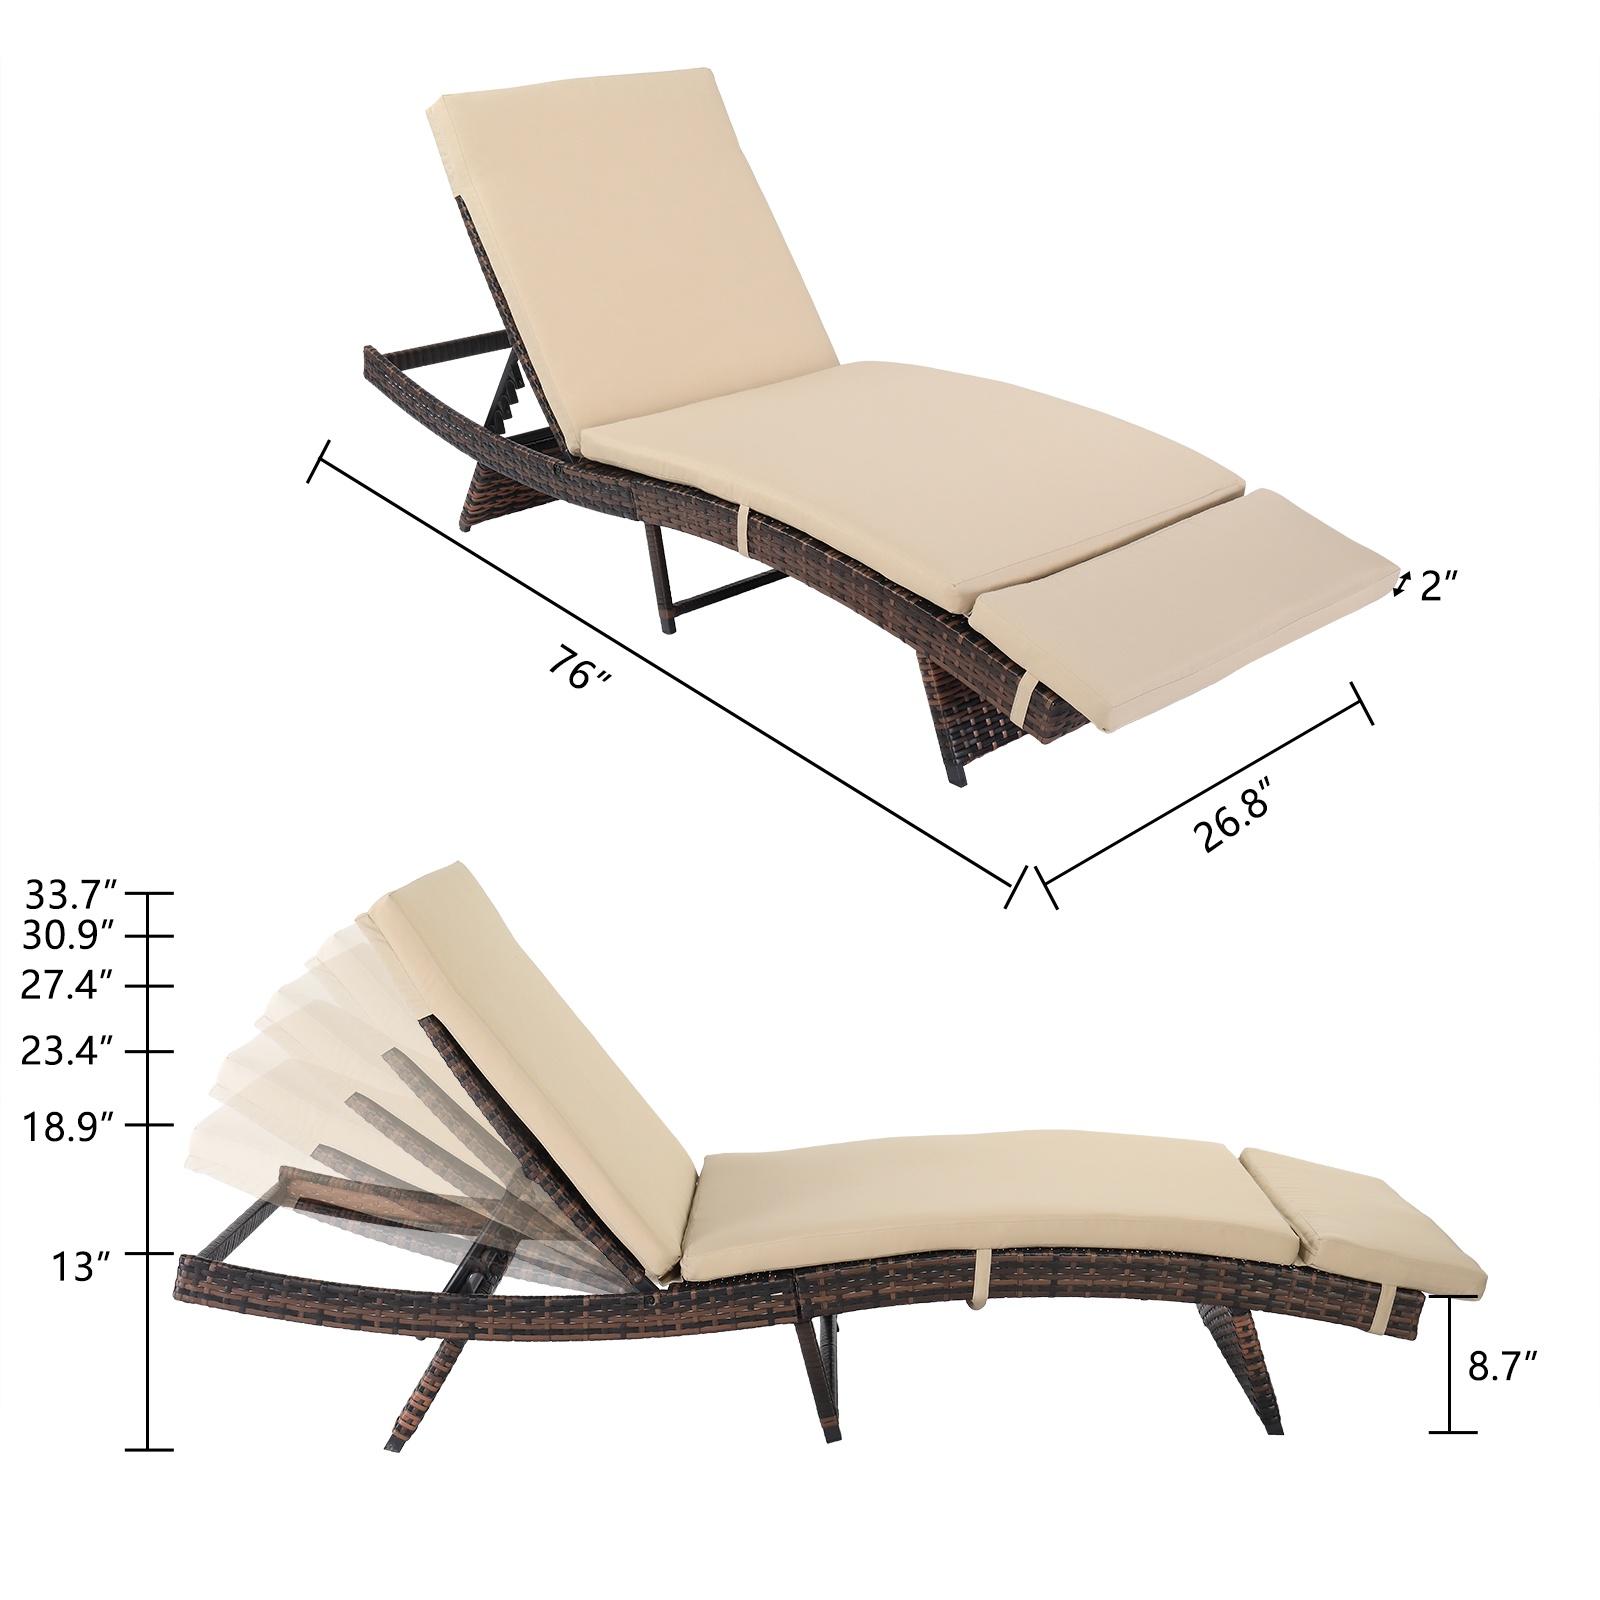 Black Rattan Chaise Lounge, Patio Lounge Chair with Canopy and Cushions, Outdoor Reclining Chair Furniture for Garden, Poolside, Deck, Backyard - image 3 of 10